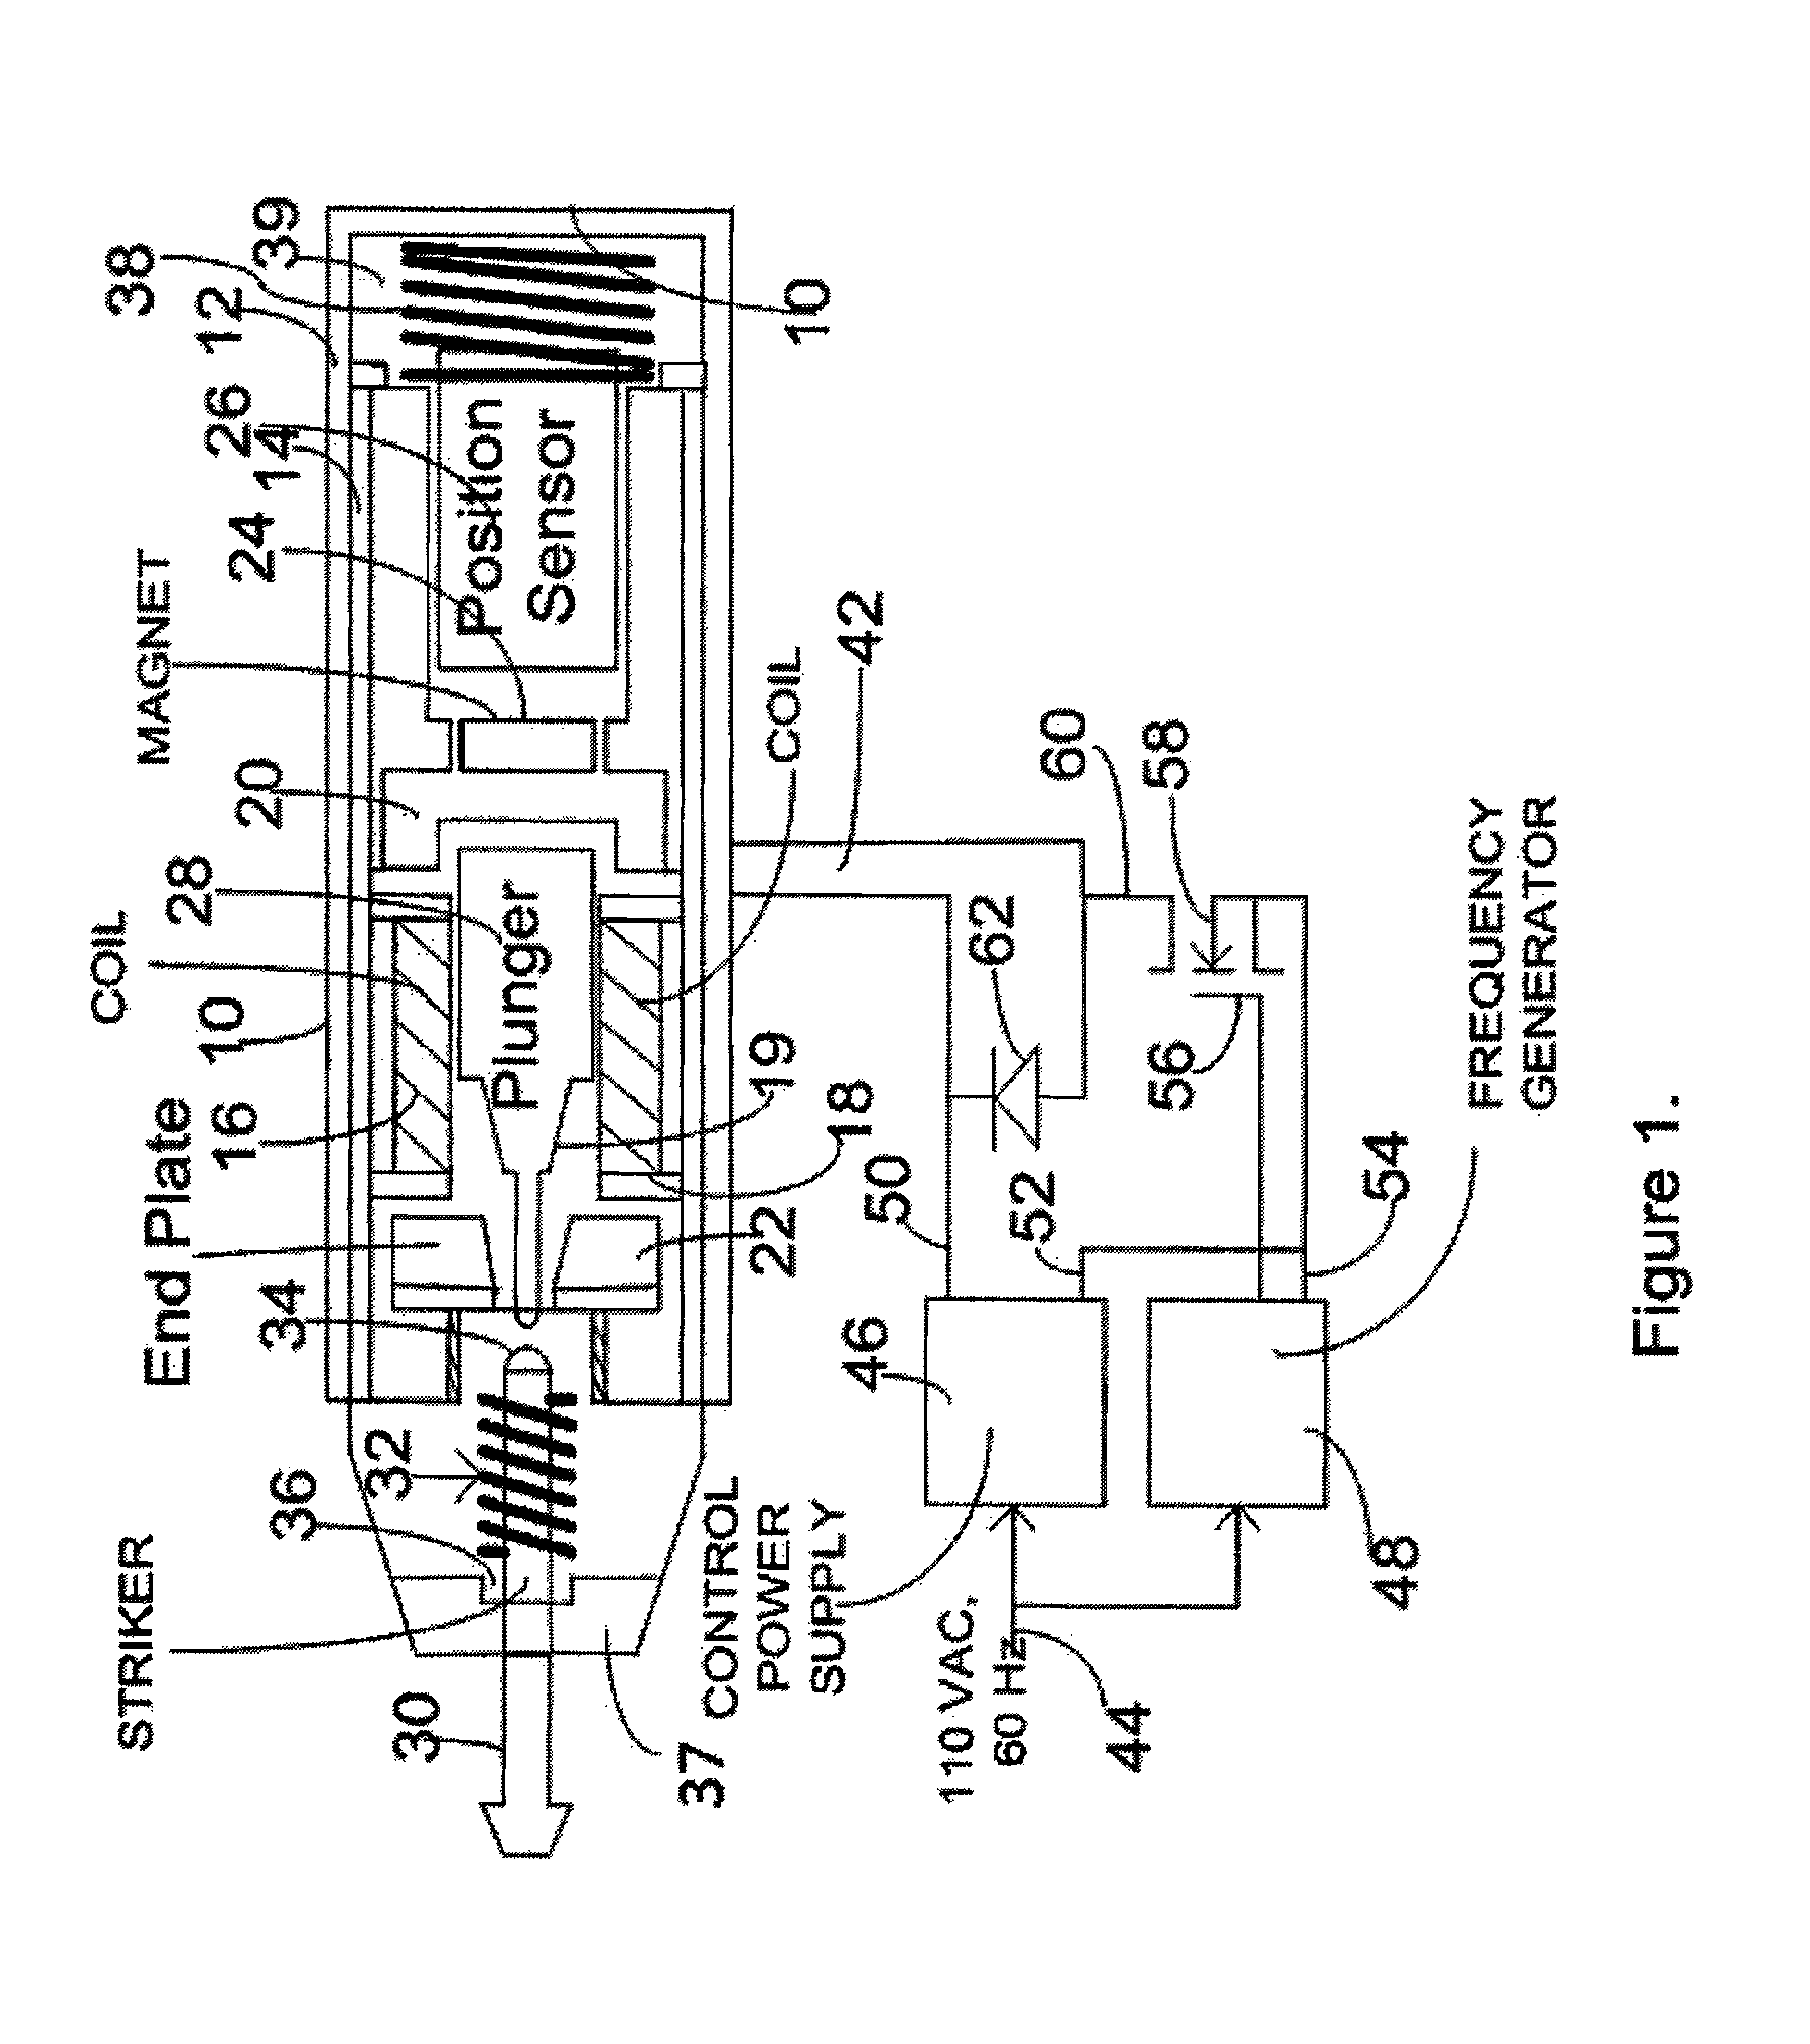 Electromagnetic device, method and apparatus for selective application to vertebrates